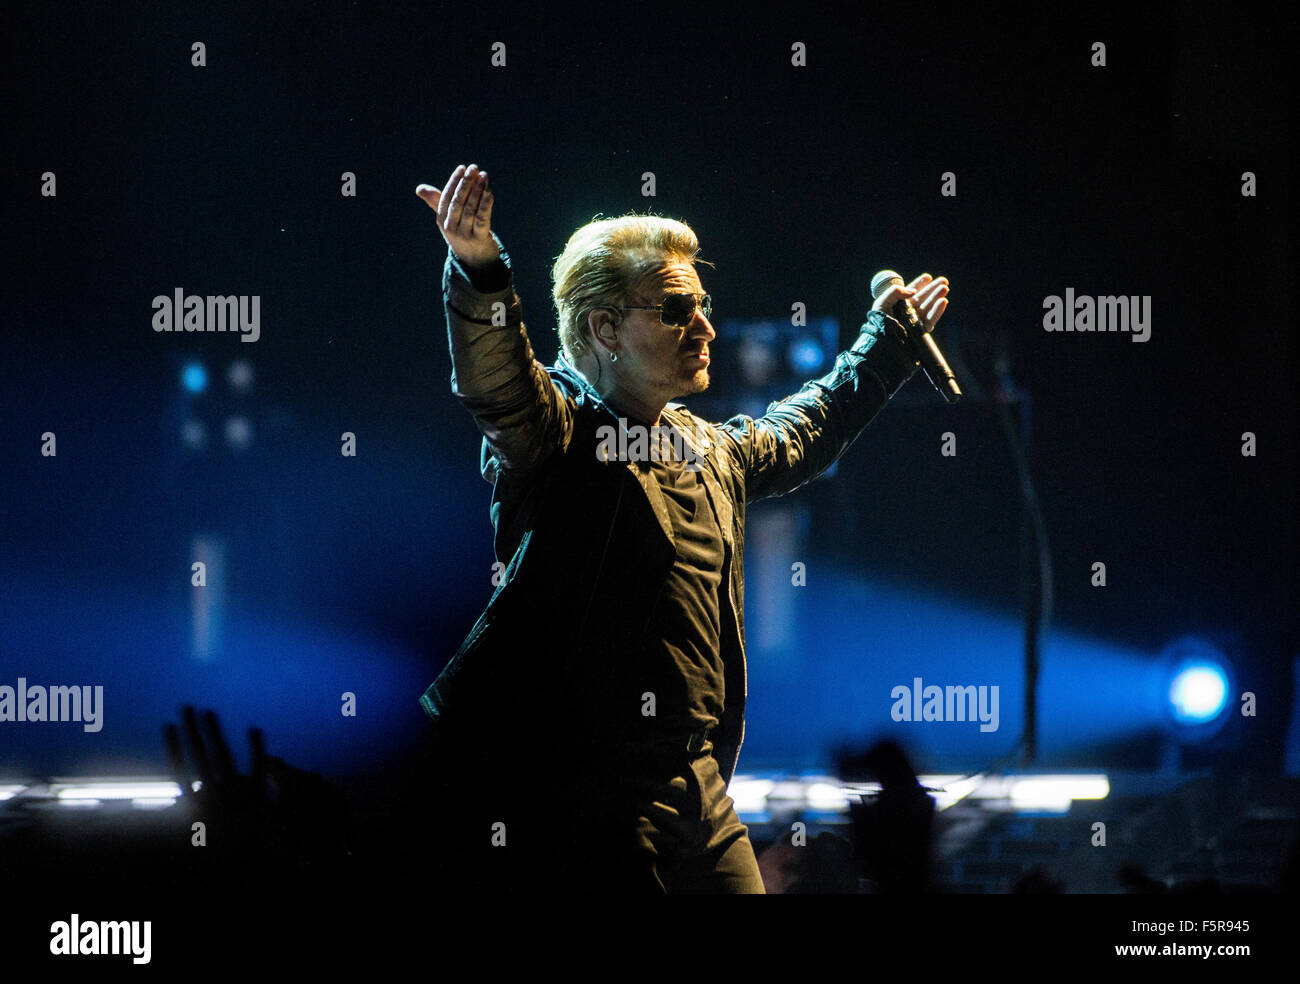 Bono of U2 performs at the SSE Hydro as part of their iNNOCENCE + eXPERIENCE tour on November 6, 2015 in Glasgow, Scotland. Stock Photo